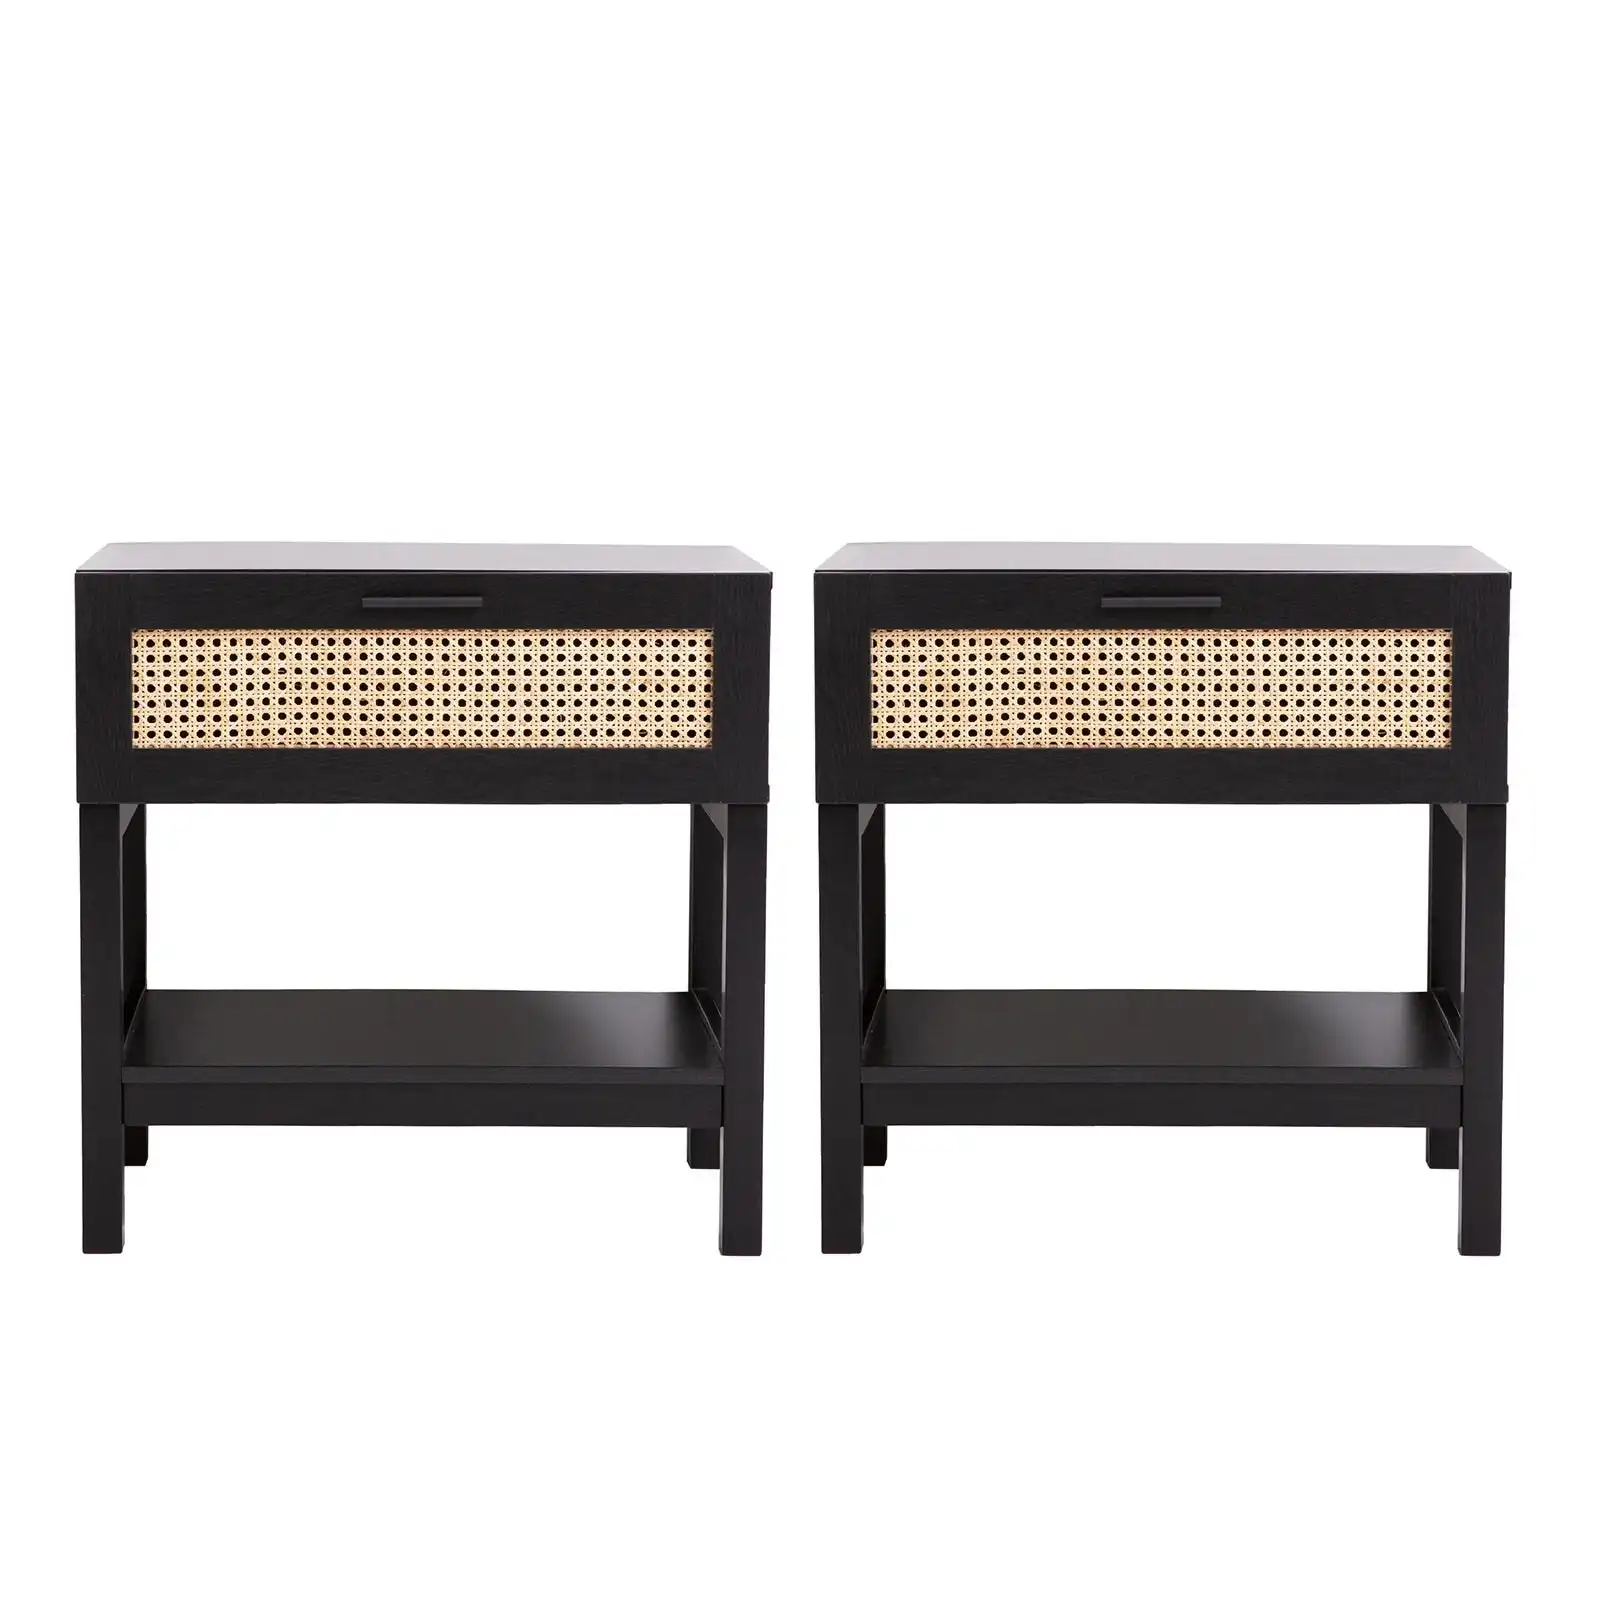 Casa Decor Tulum Rattan Bedside Table Drawers Table Nightstand Cabinet Black x 2